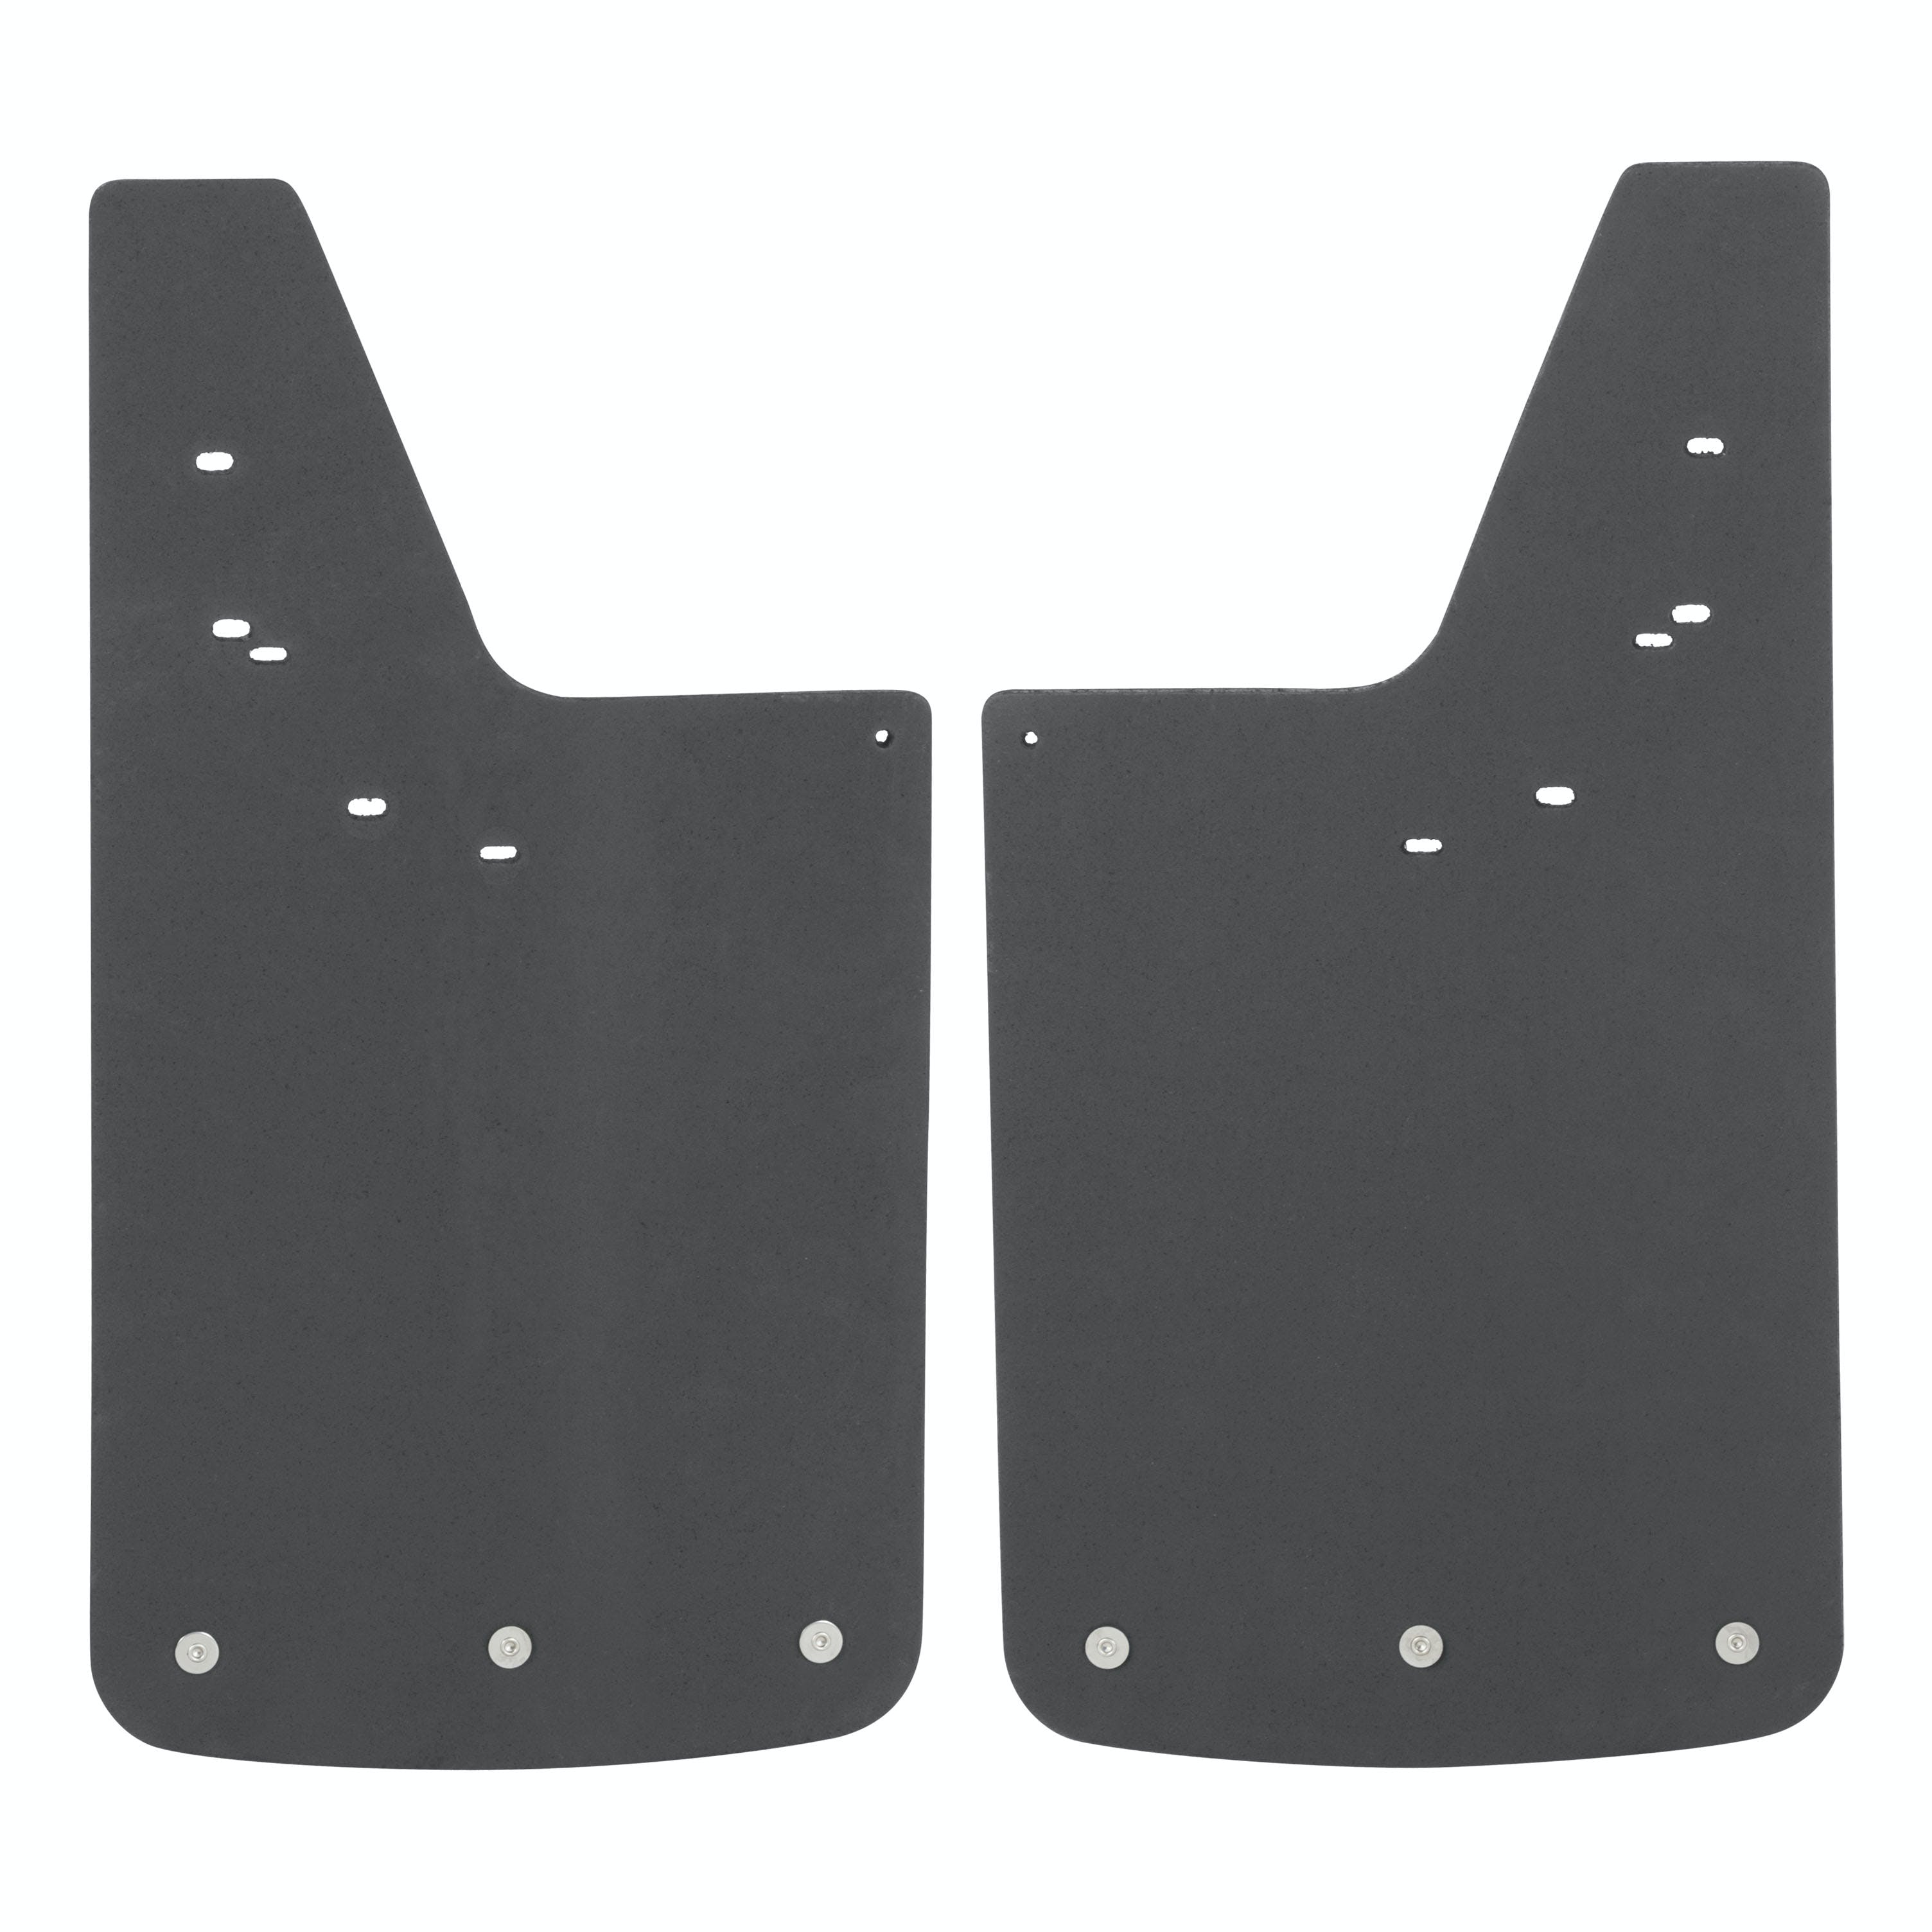 LUVERNE 251523 Textured Rubber Mud Guards